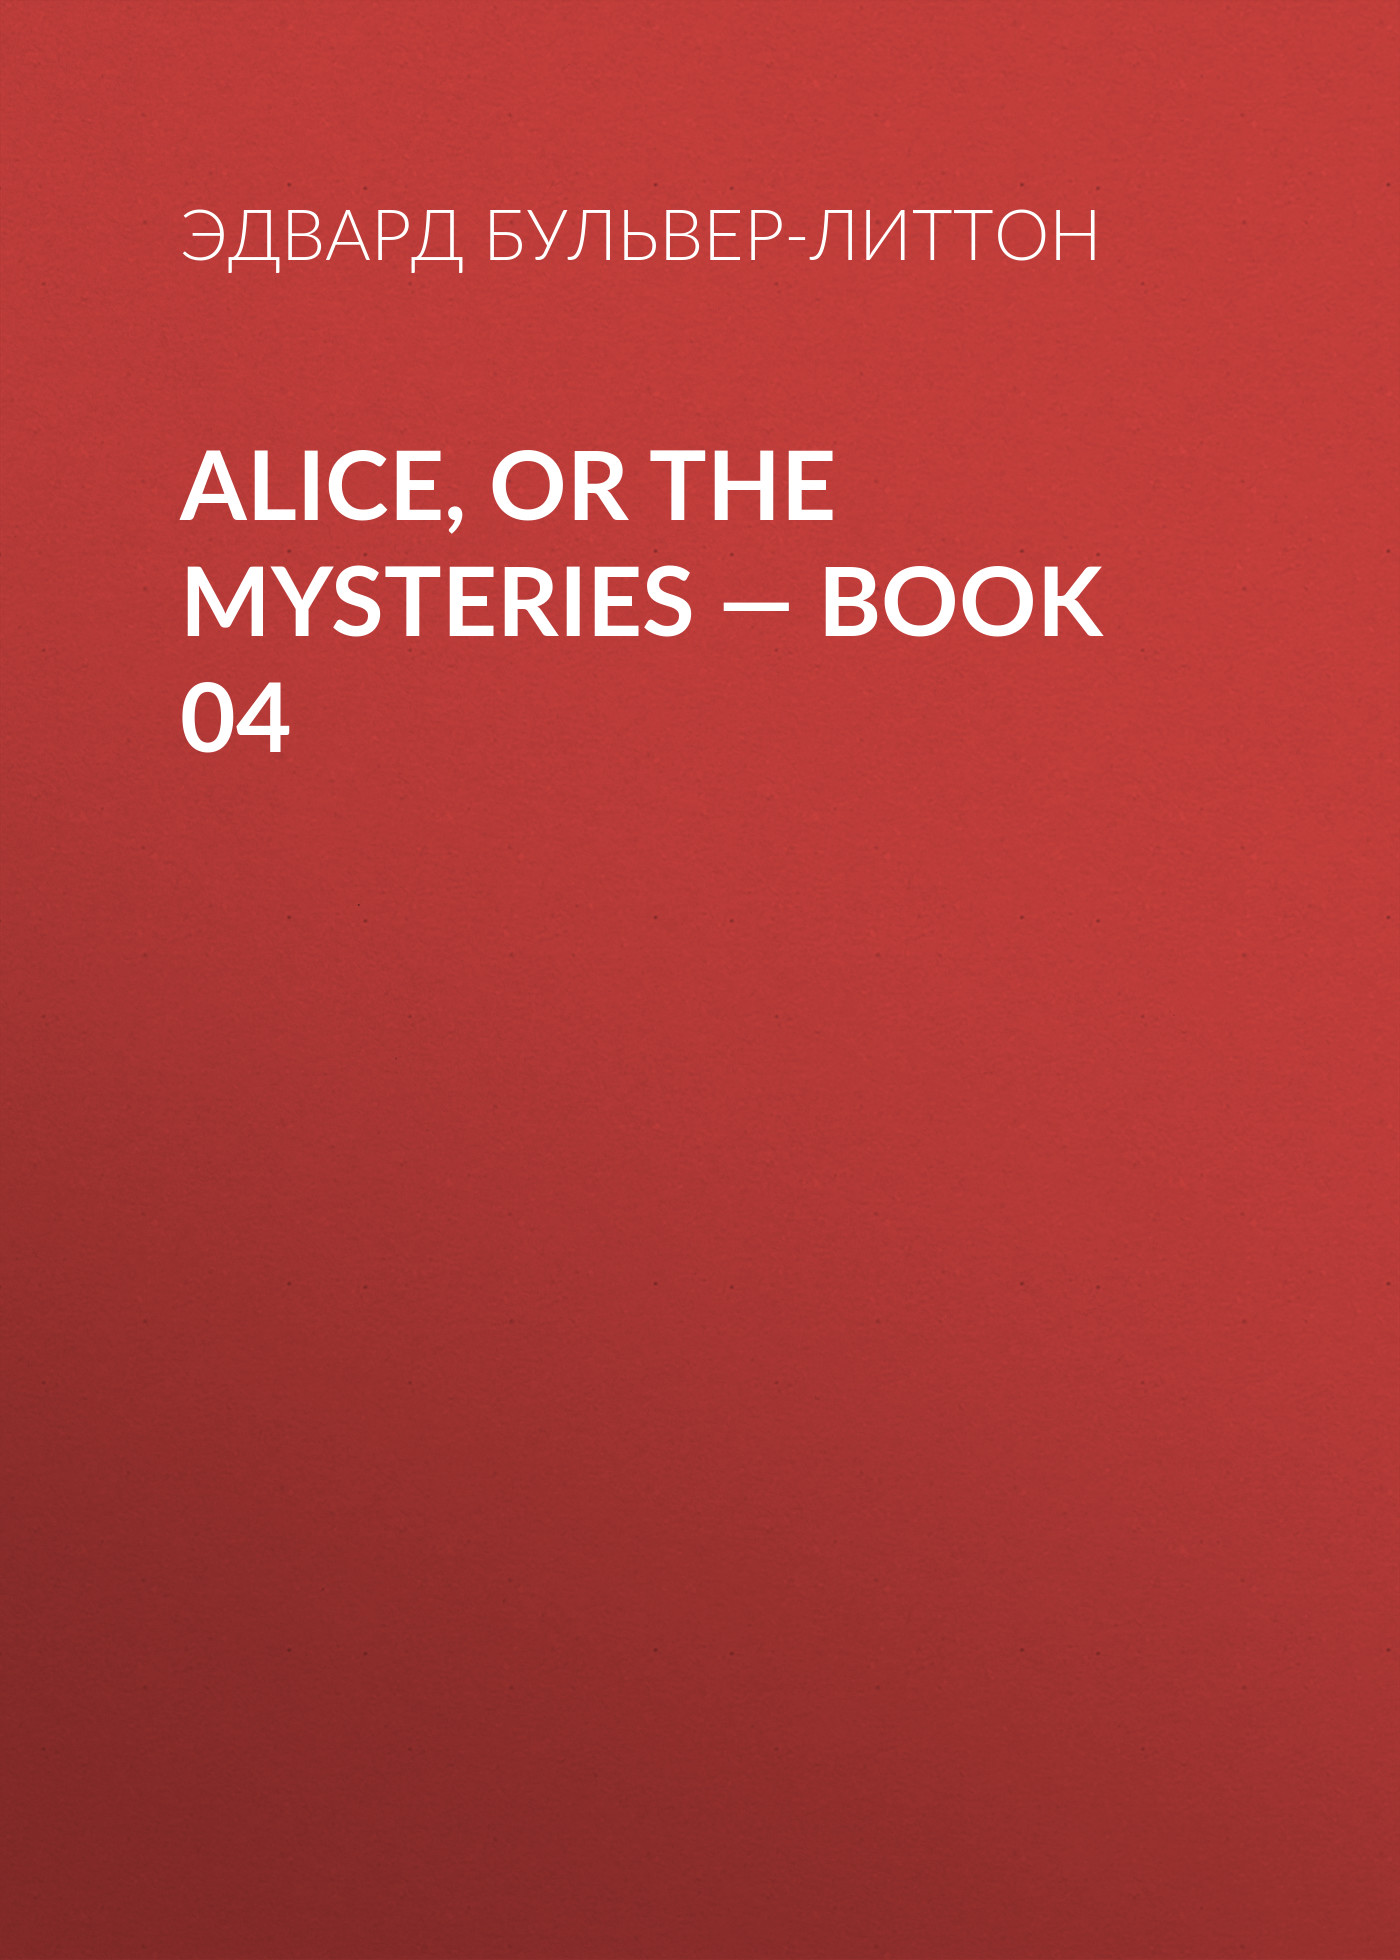 Alice, or the Mysteries— Book 04